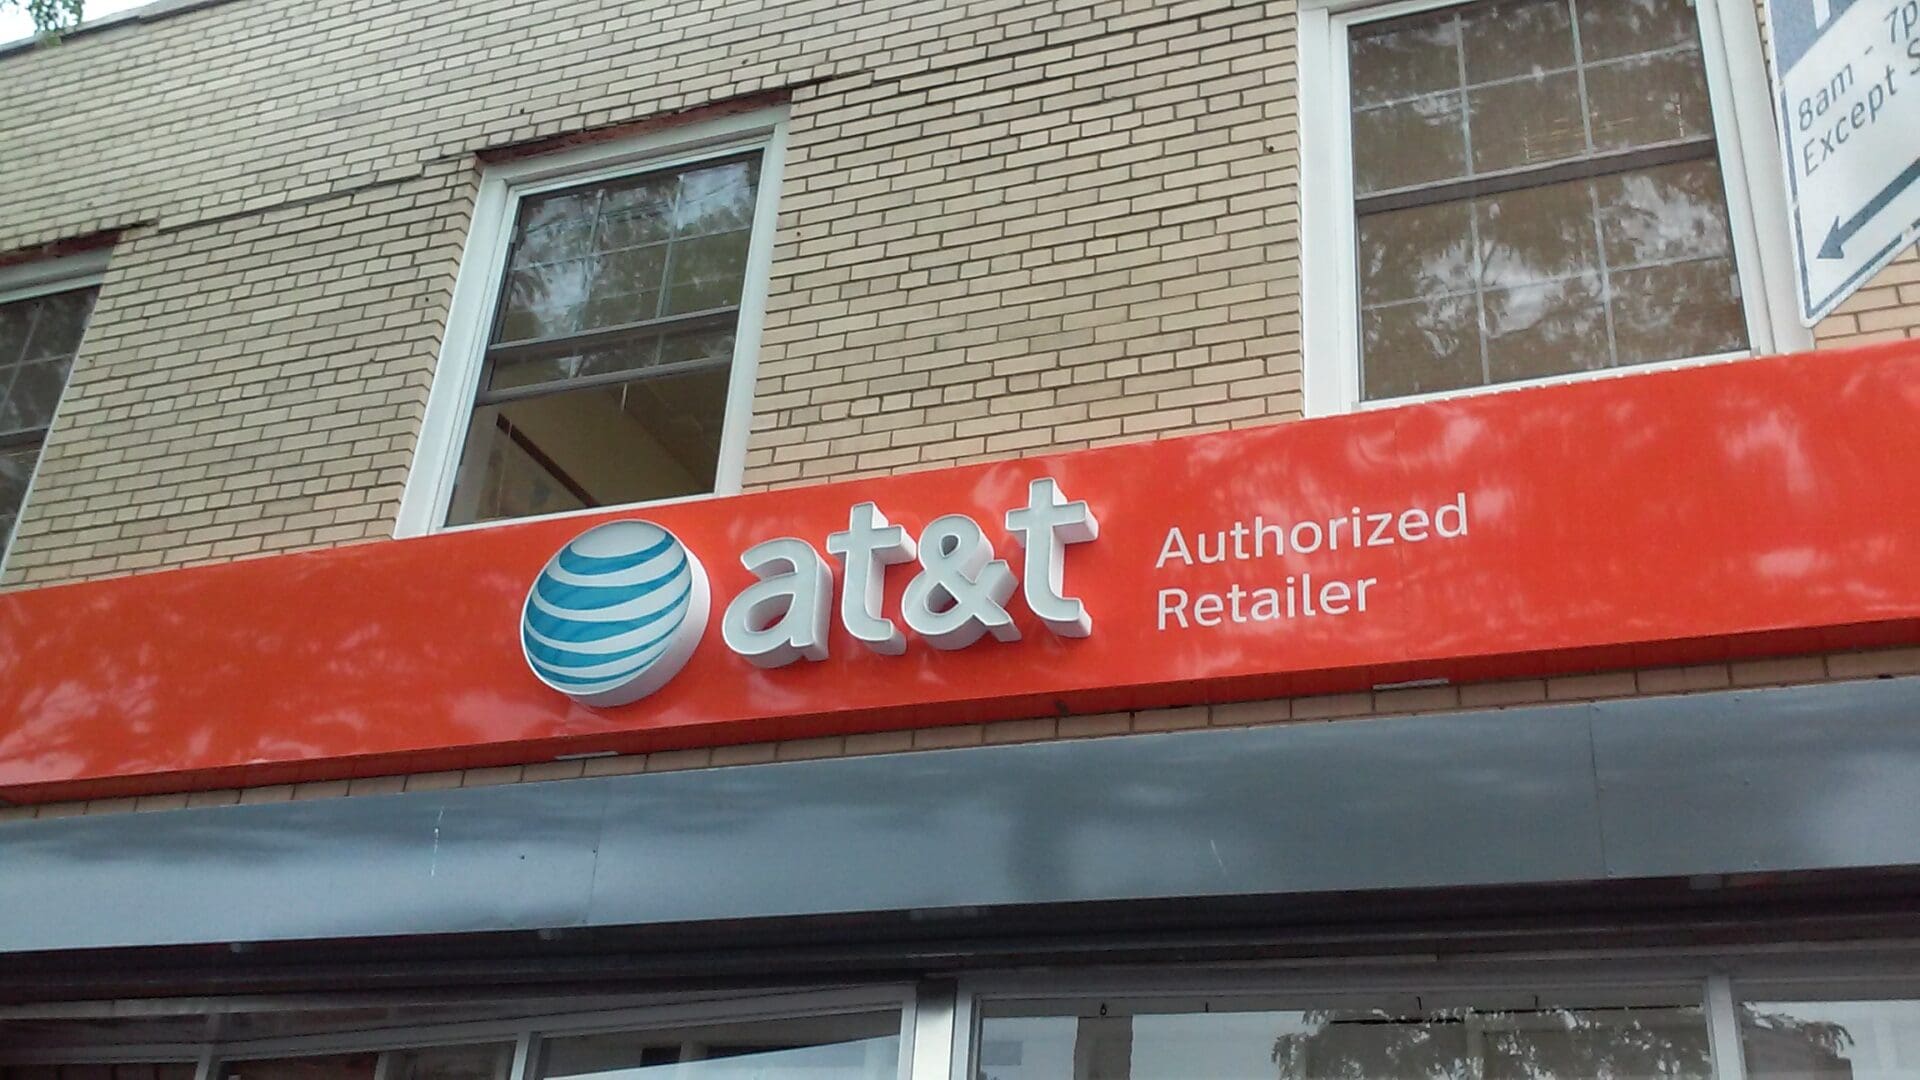 Red and white AT&T authorized retailer sign on a building facade with windows and trees reflected in the windows, near the ADP USA Solutions Gallery.